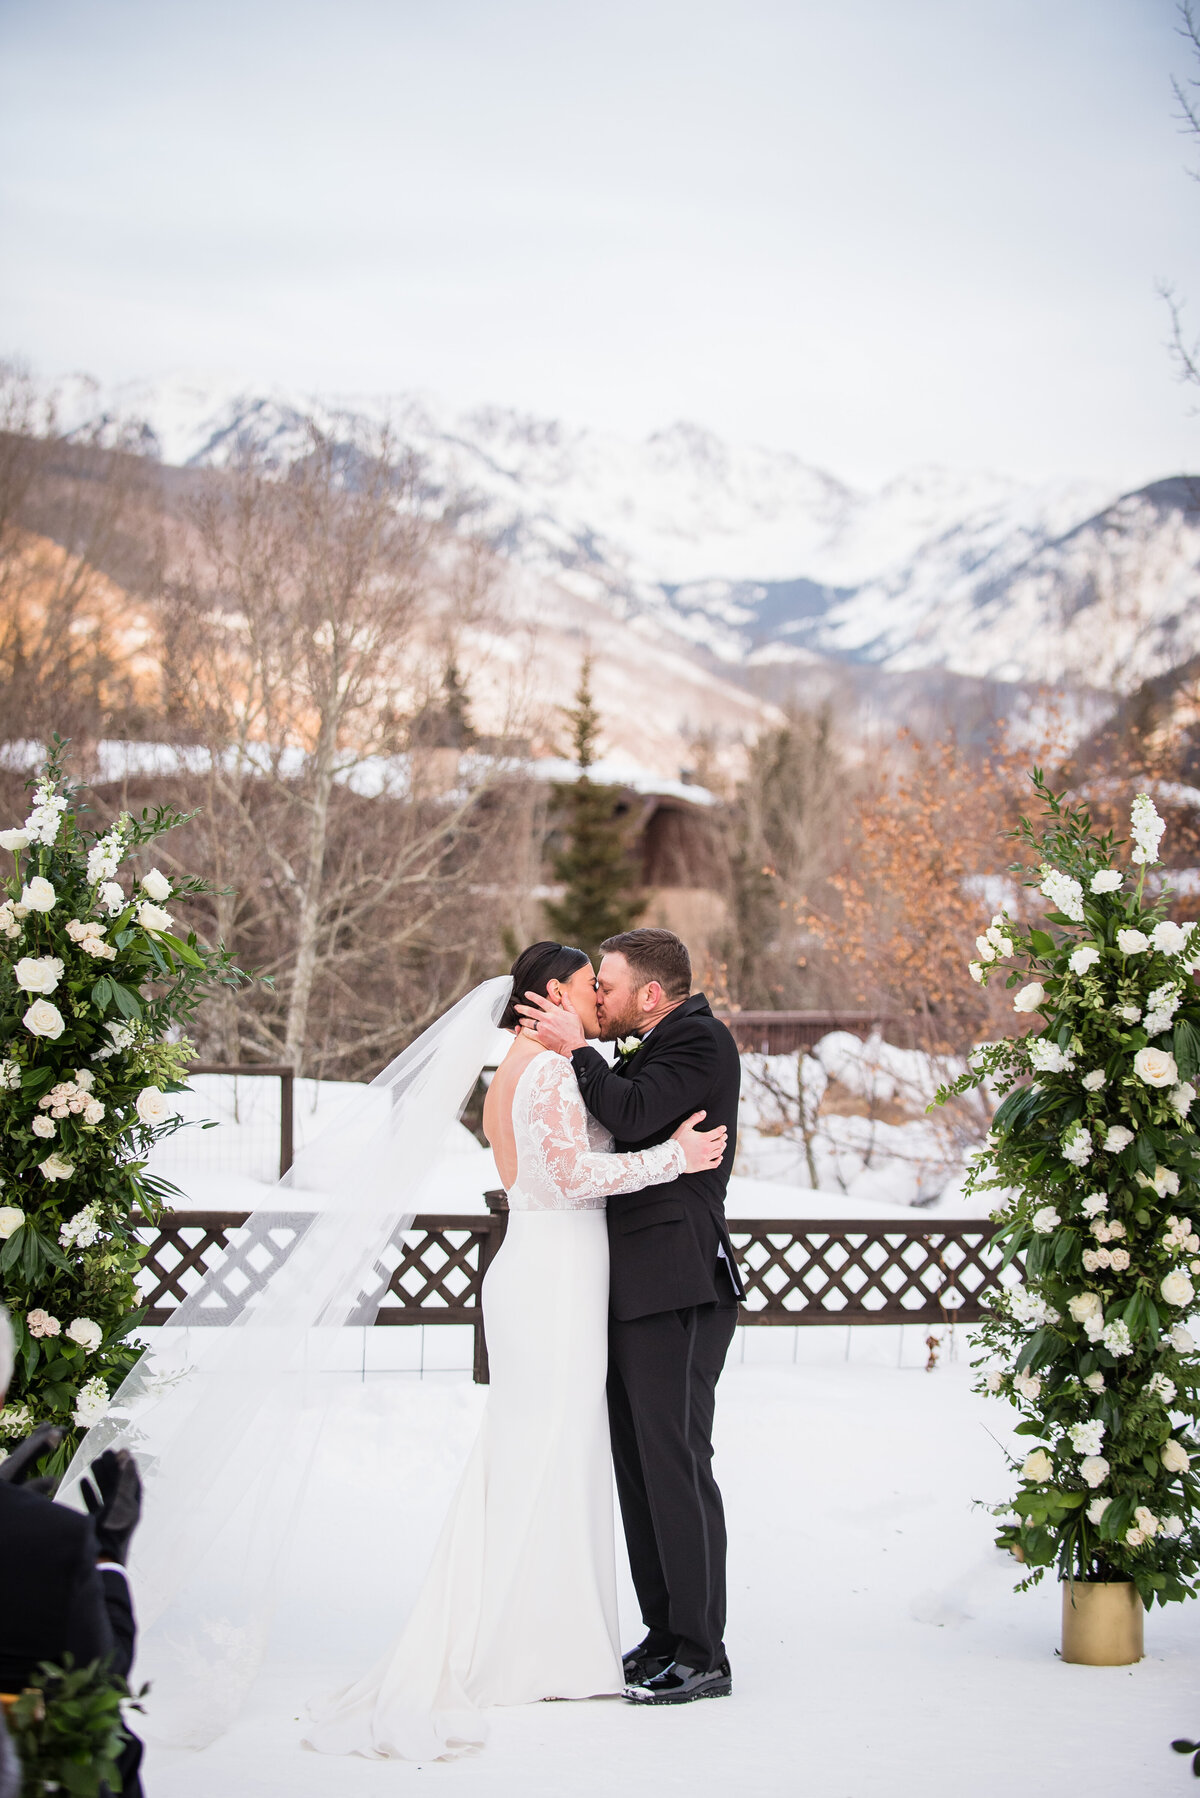 A groom grabs his bride's face and kisses her at the end of their ceremony with snowy Colorado mountains in the background.